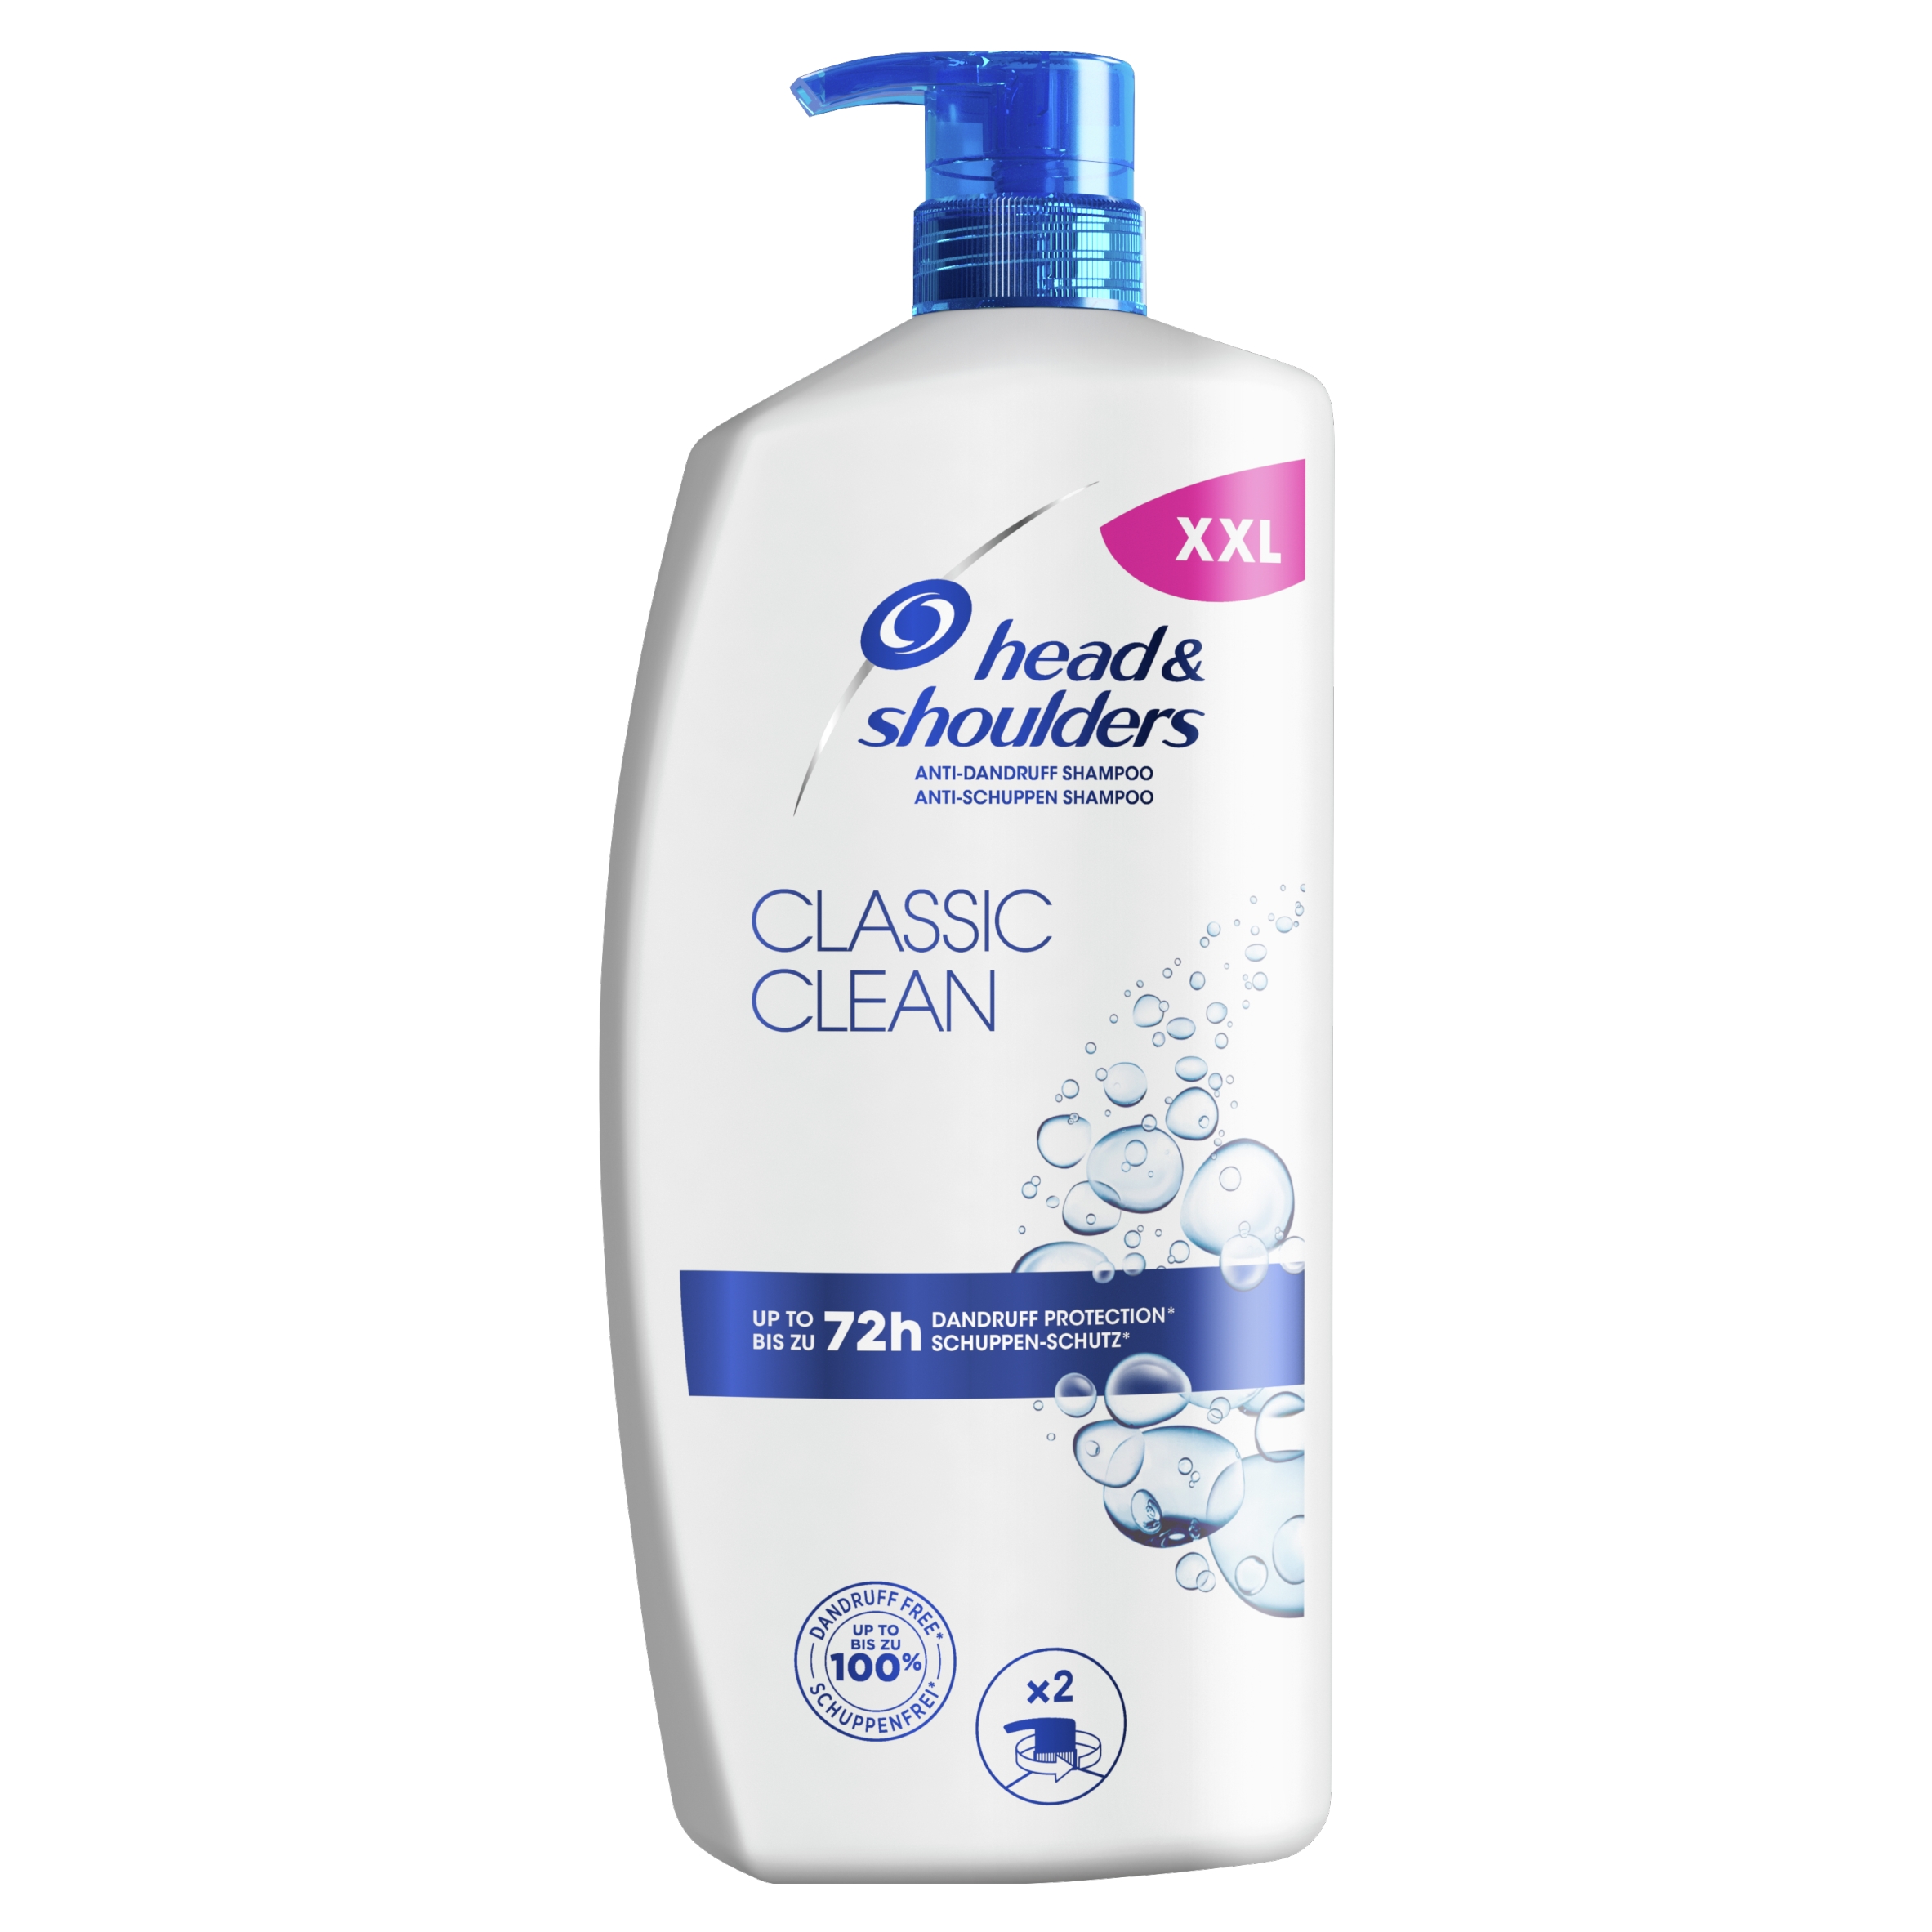 nowy szampon head and shoulders